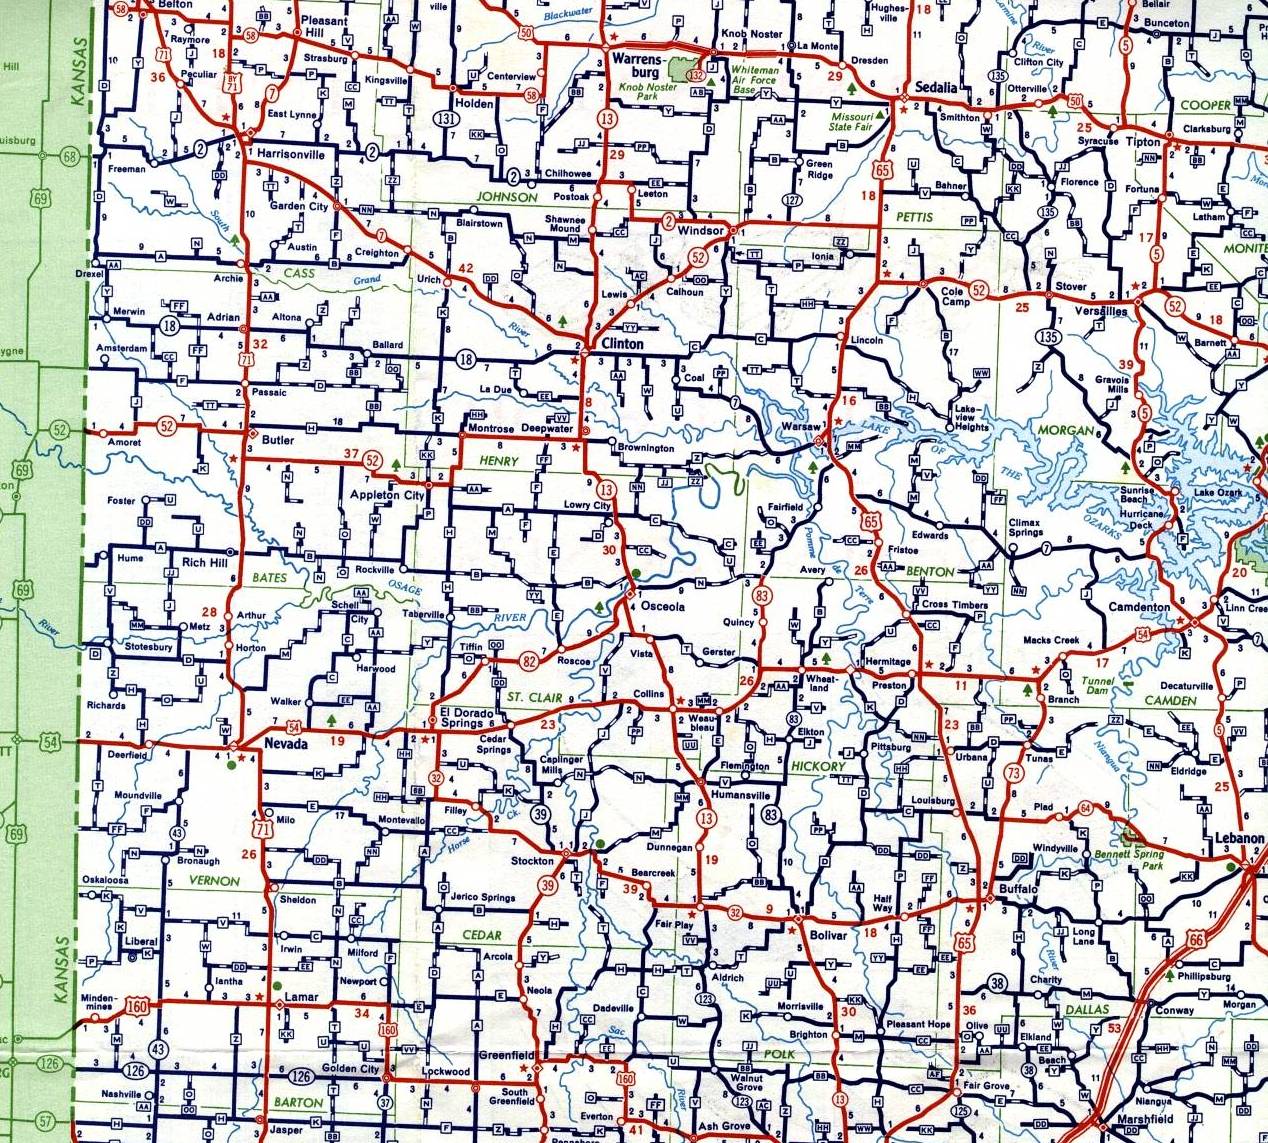 West-central section of Missouri from 1959 official highway map